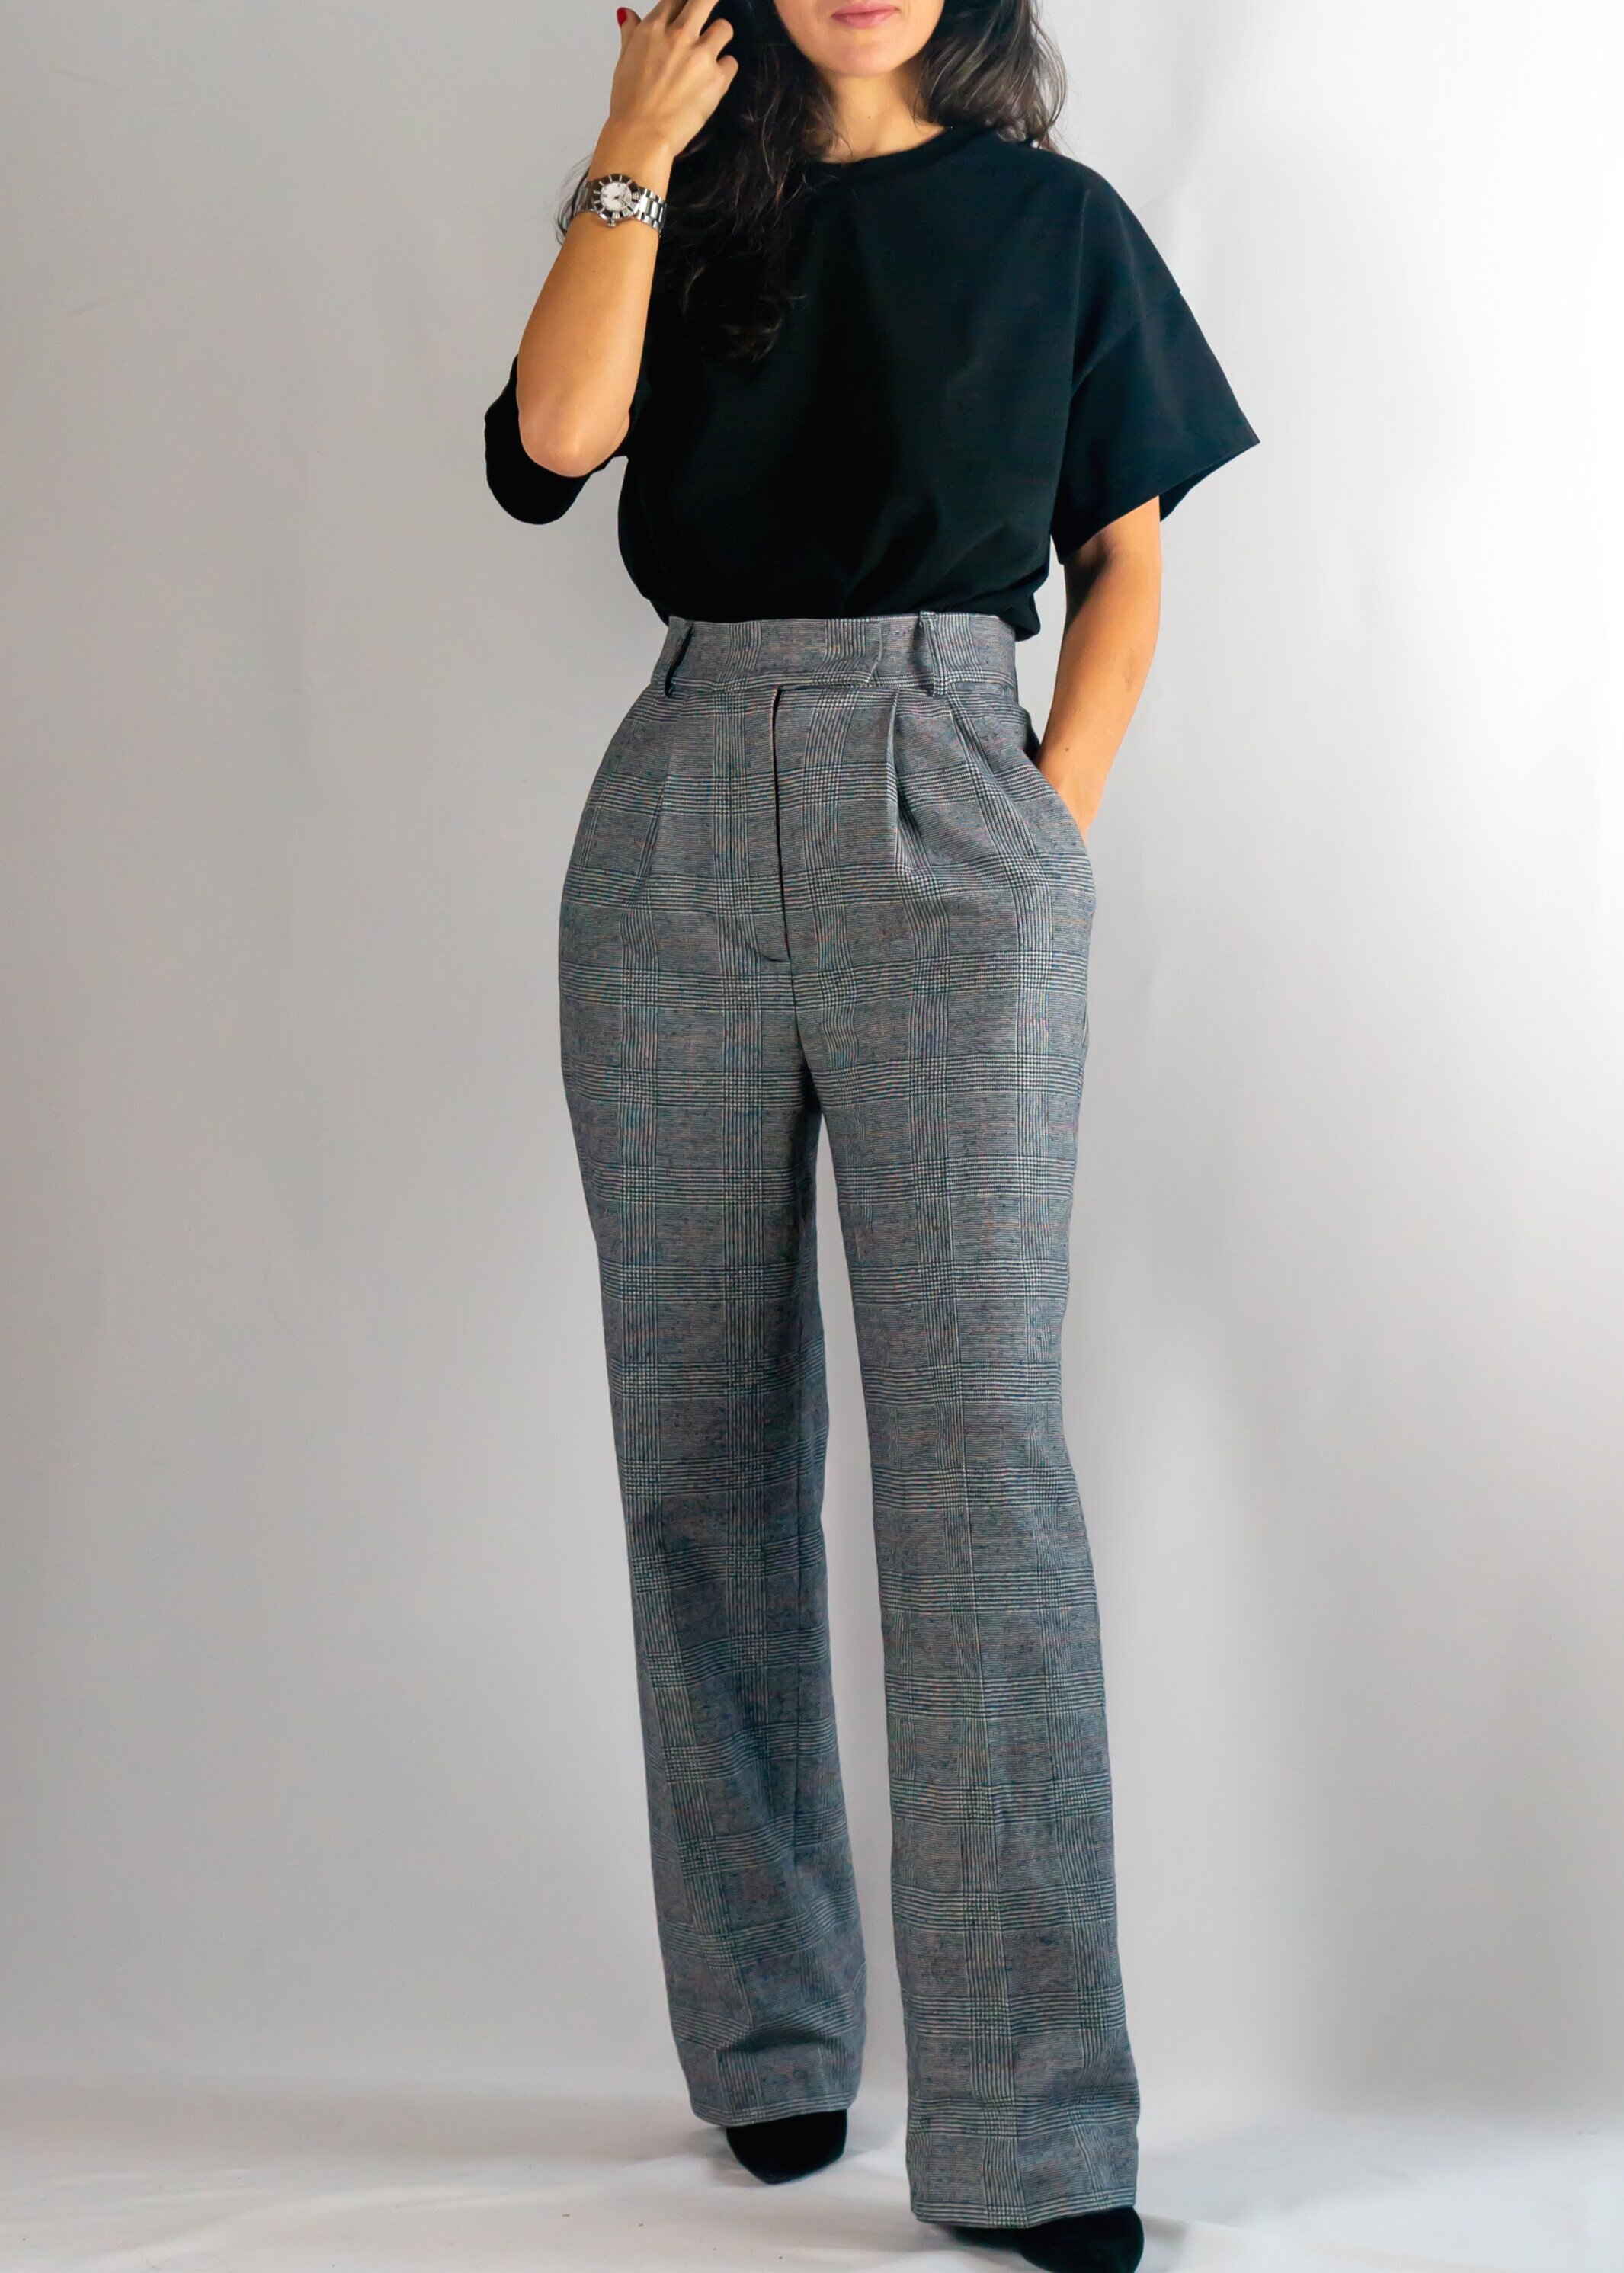 Fashion Trousers Pleated Trousers Just Pleated Trousers light grey check pattern business style 